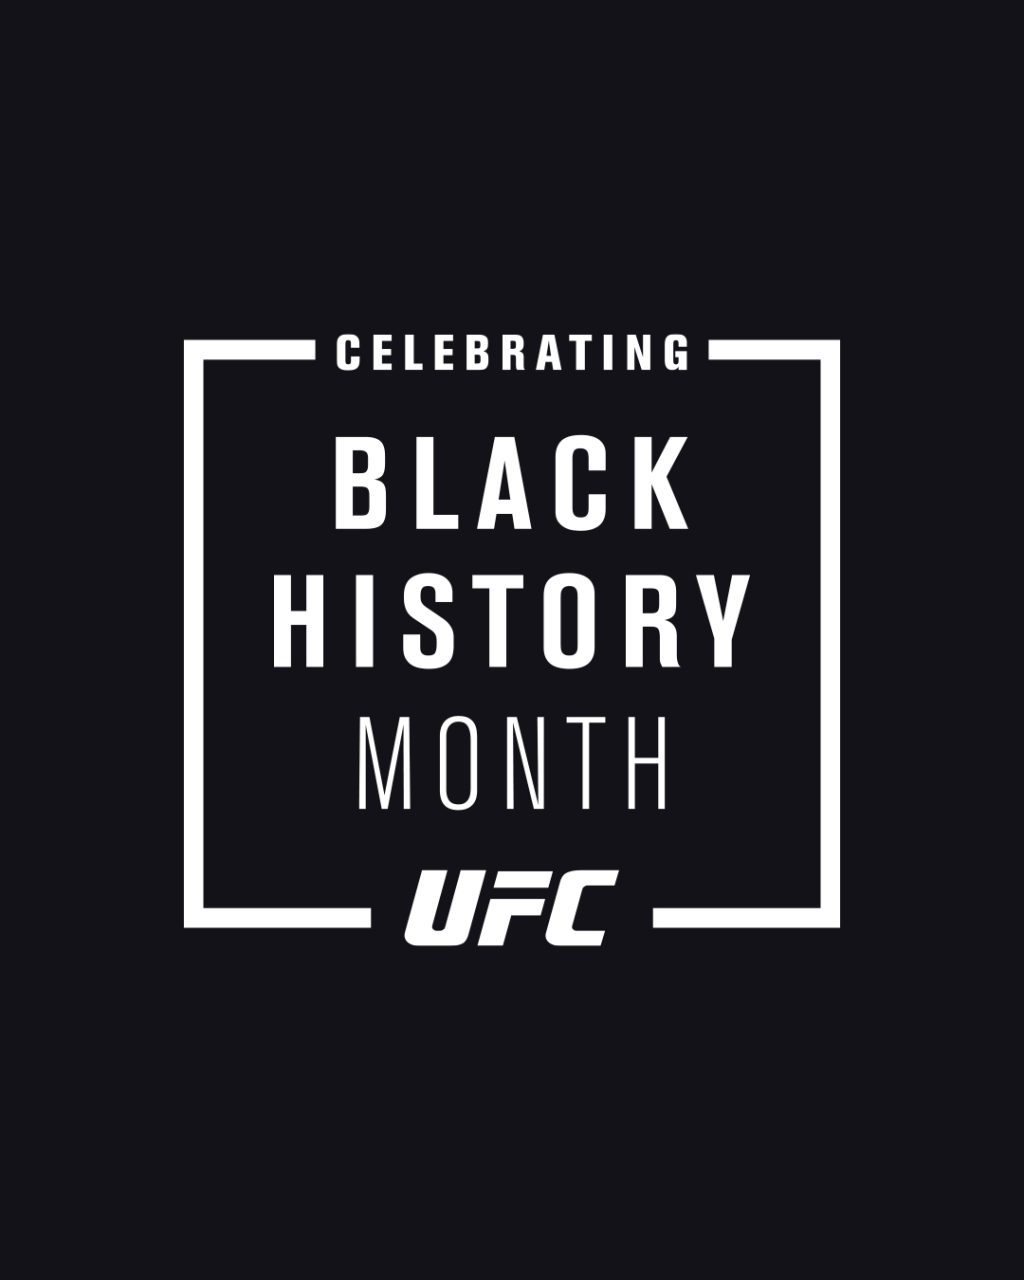 UFC launches month long celebration of Black History Month